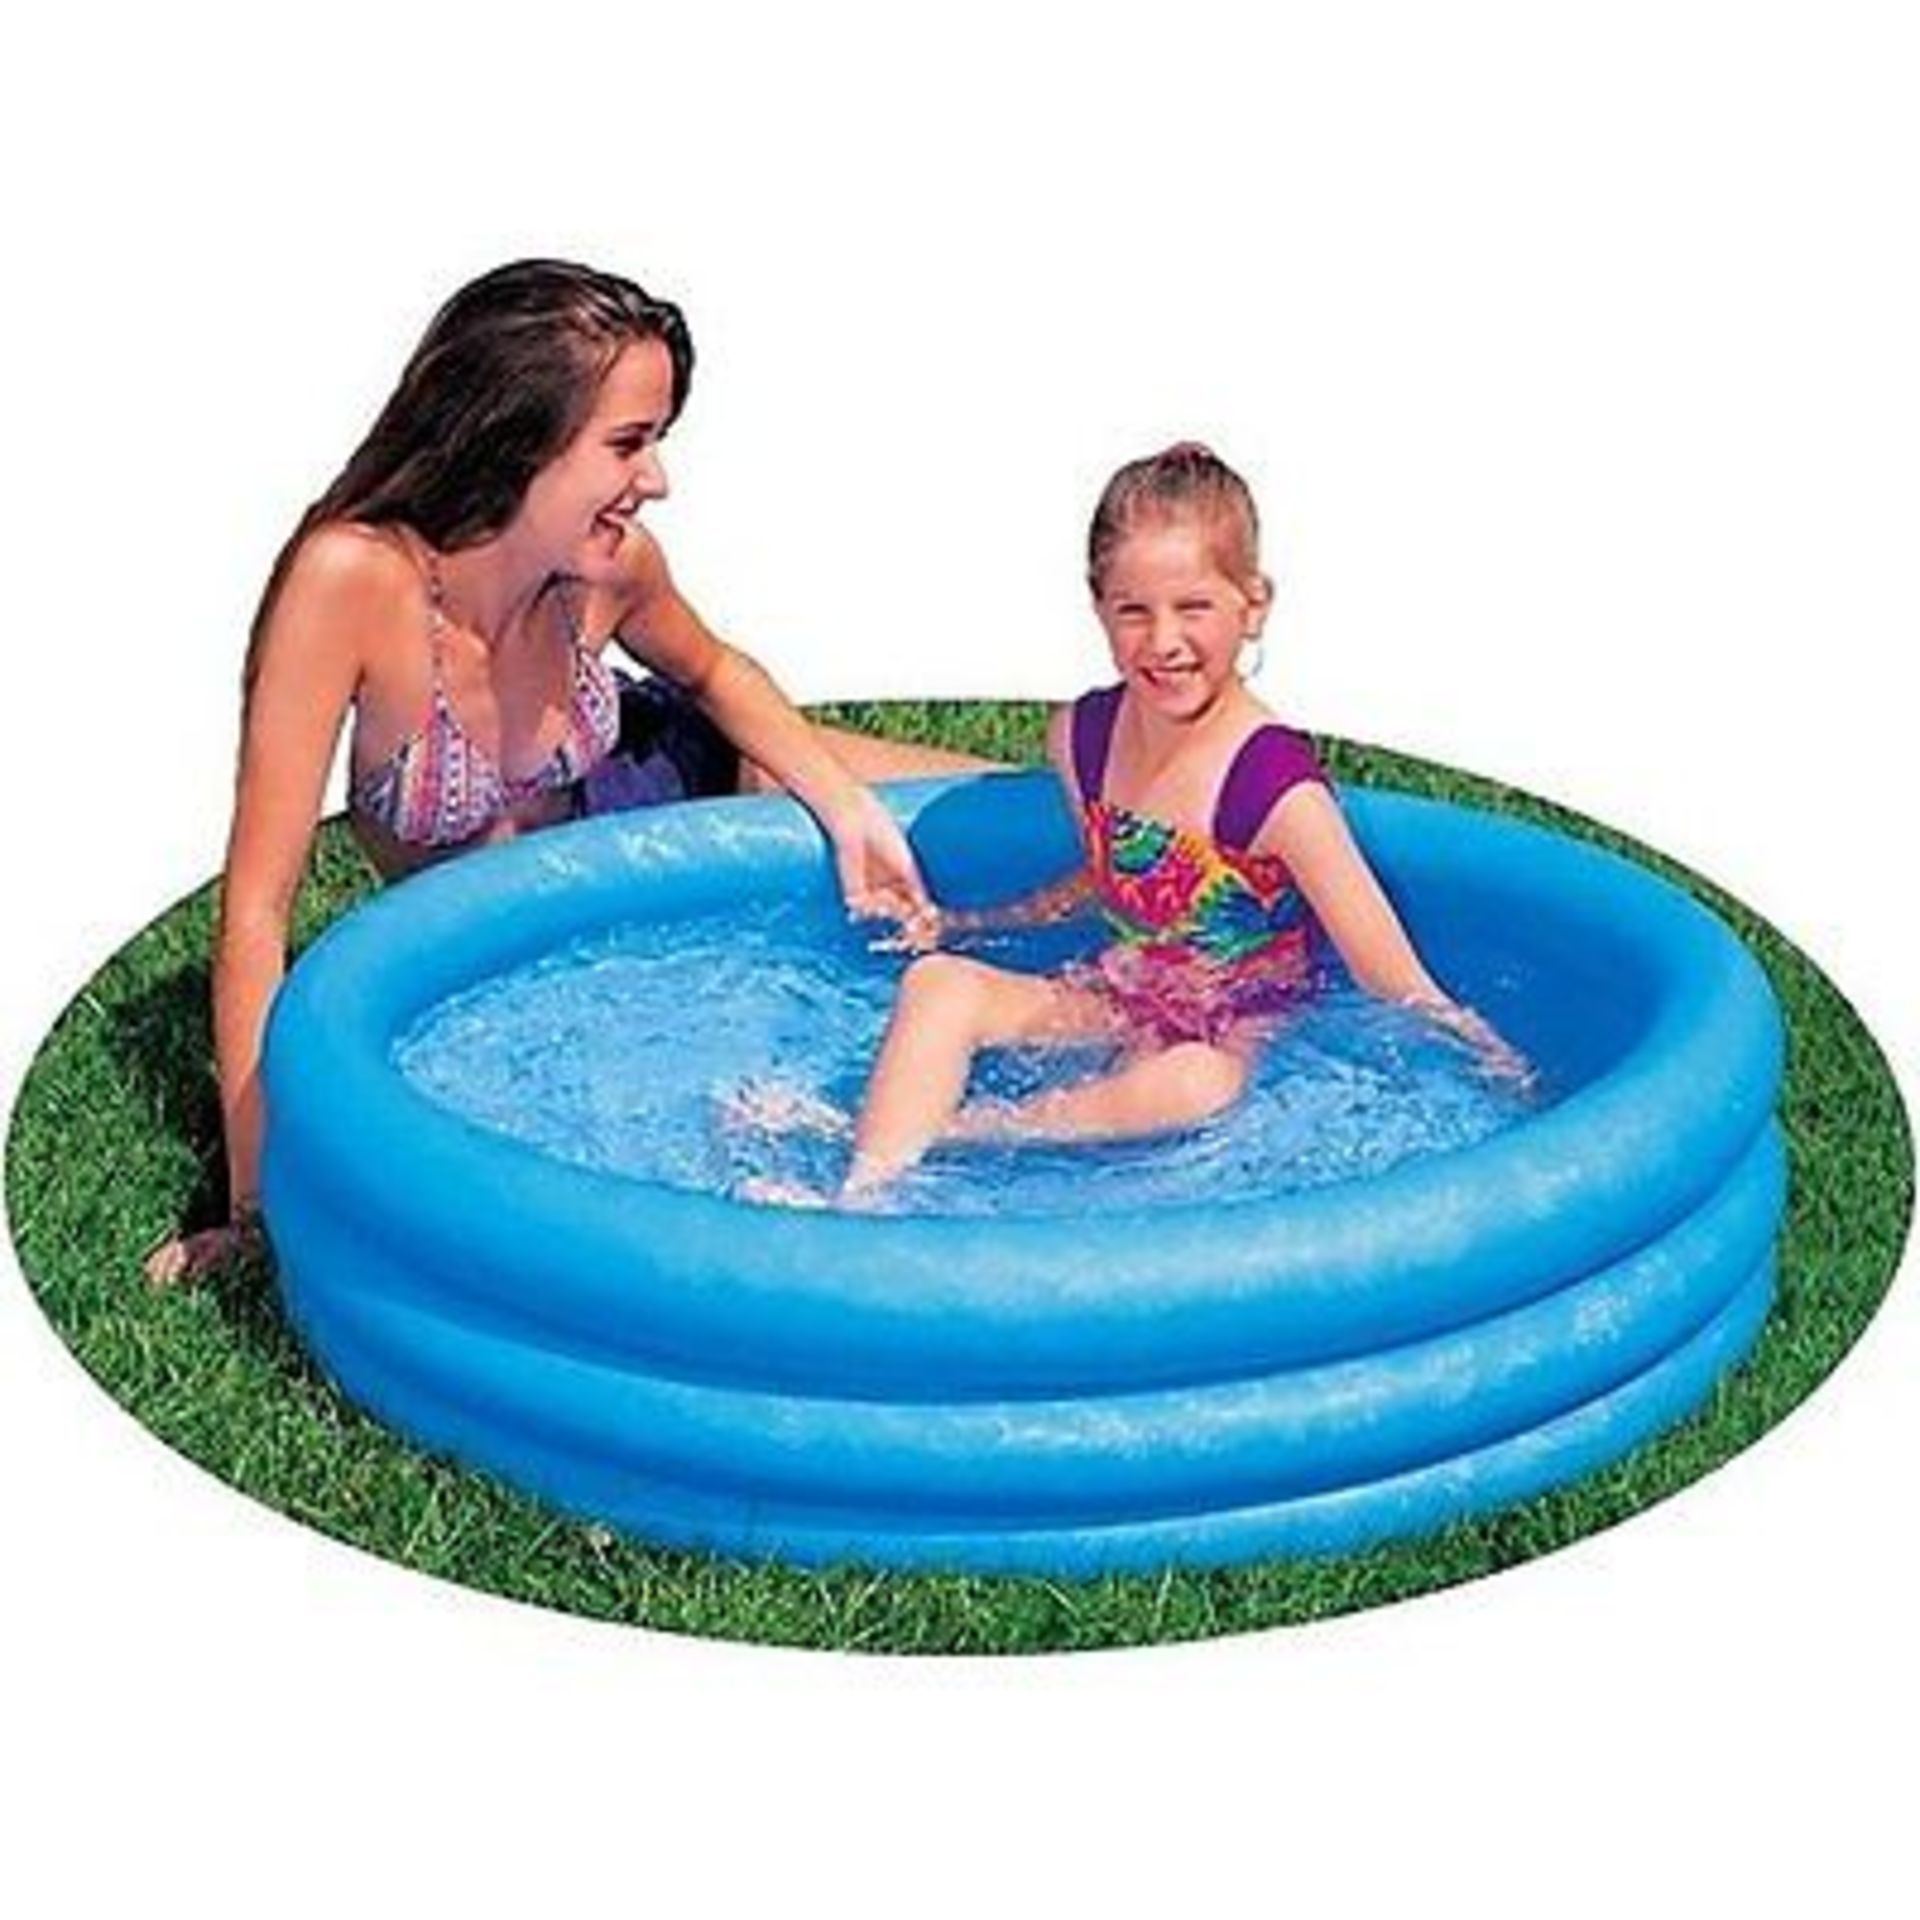 V Brand New Kids Outdoor Three Ring Pool Age 3 Years + ISP £7.49 (Ebay) X 2 YOUR BID PRICE TO BE